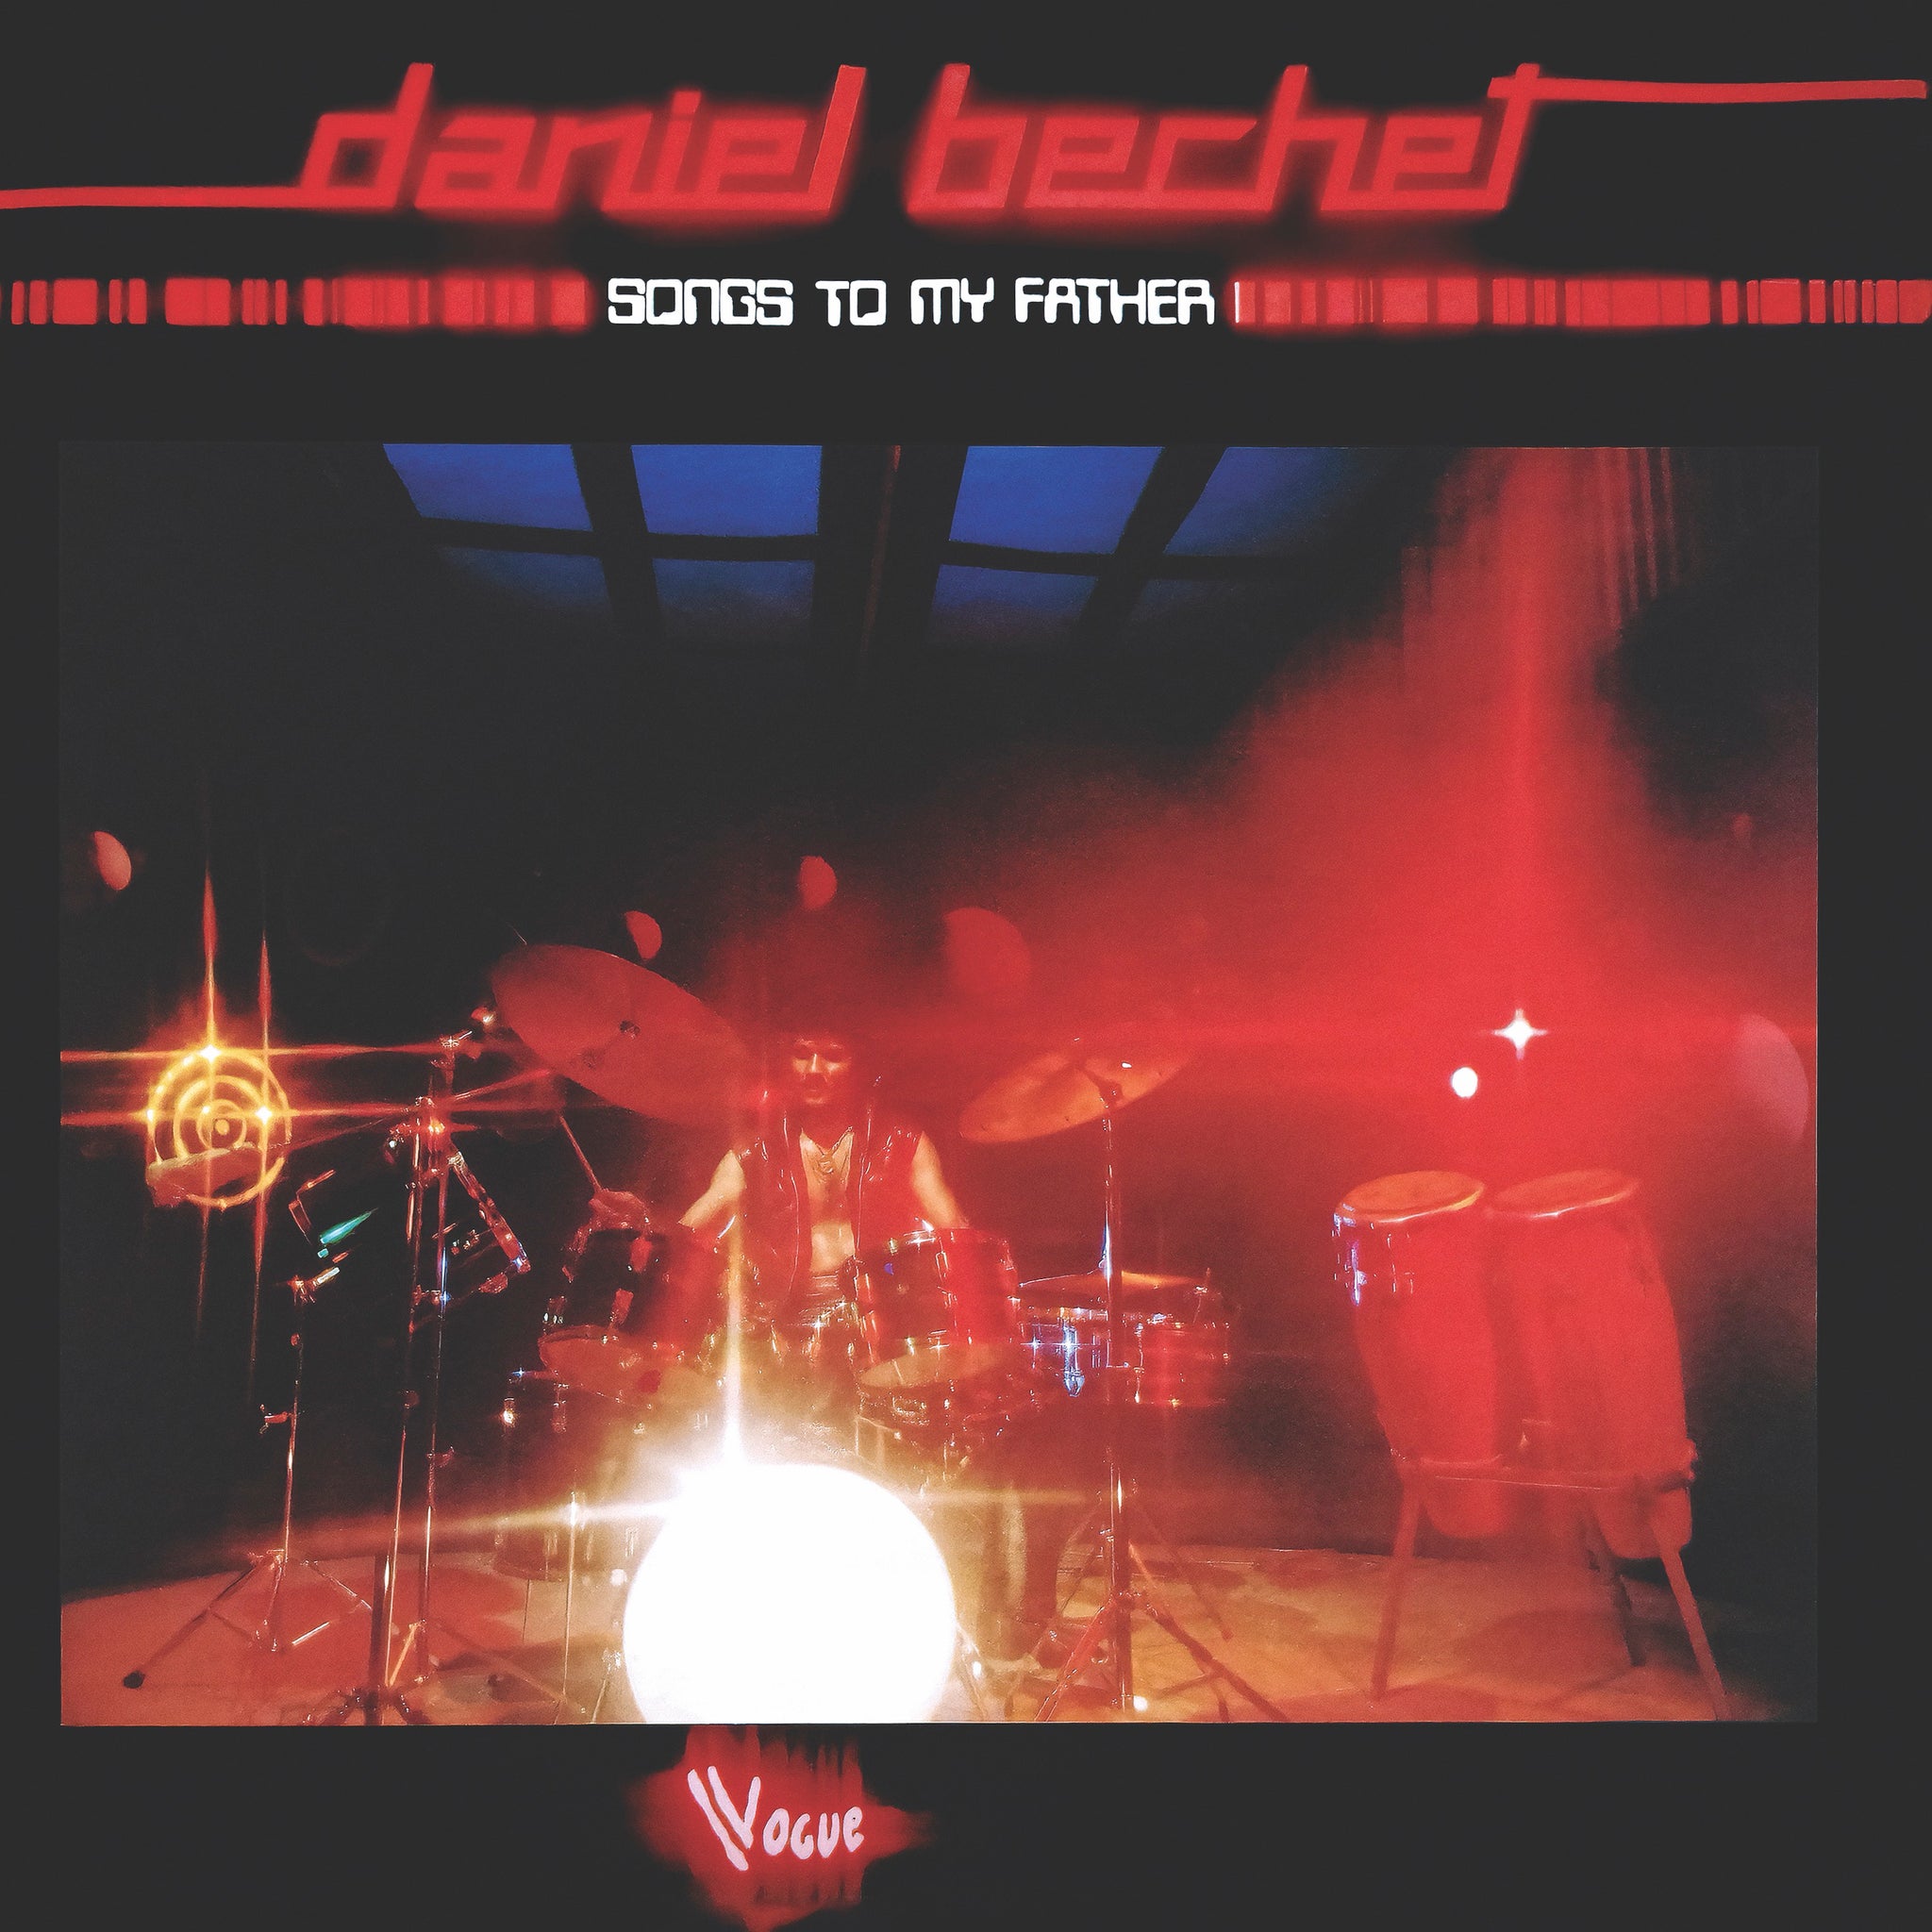 Daniel Bechet – "Songs To My Father"